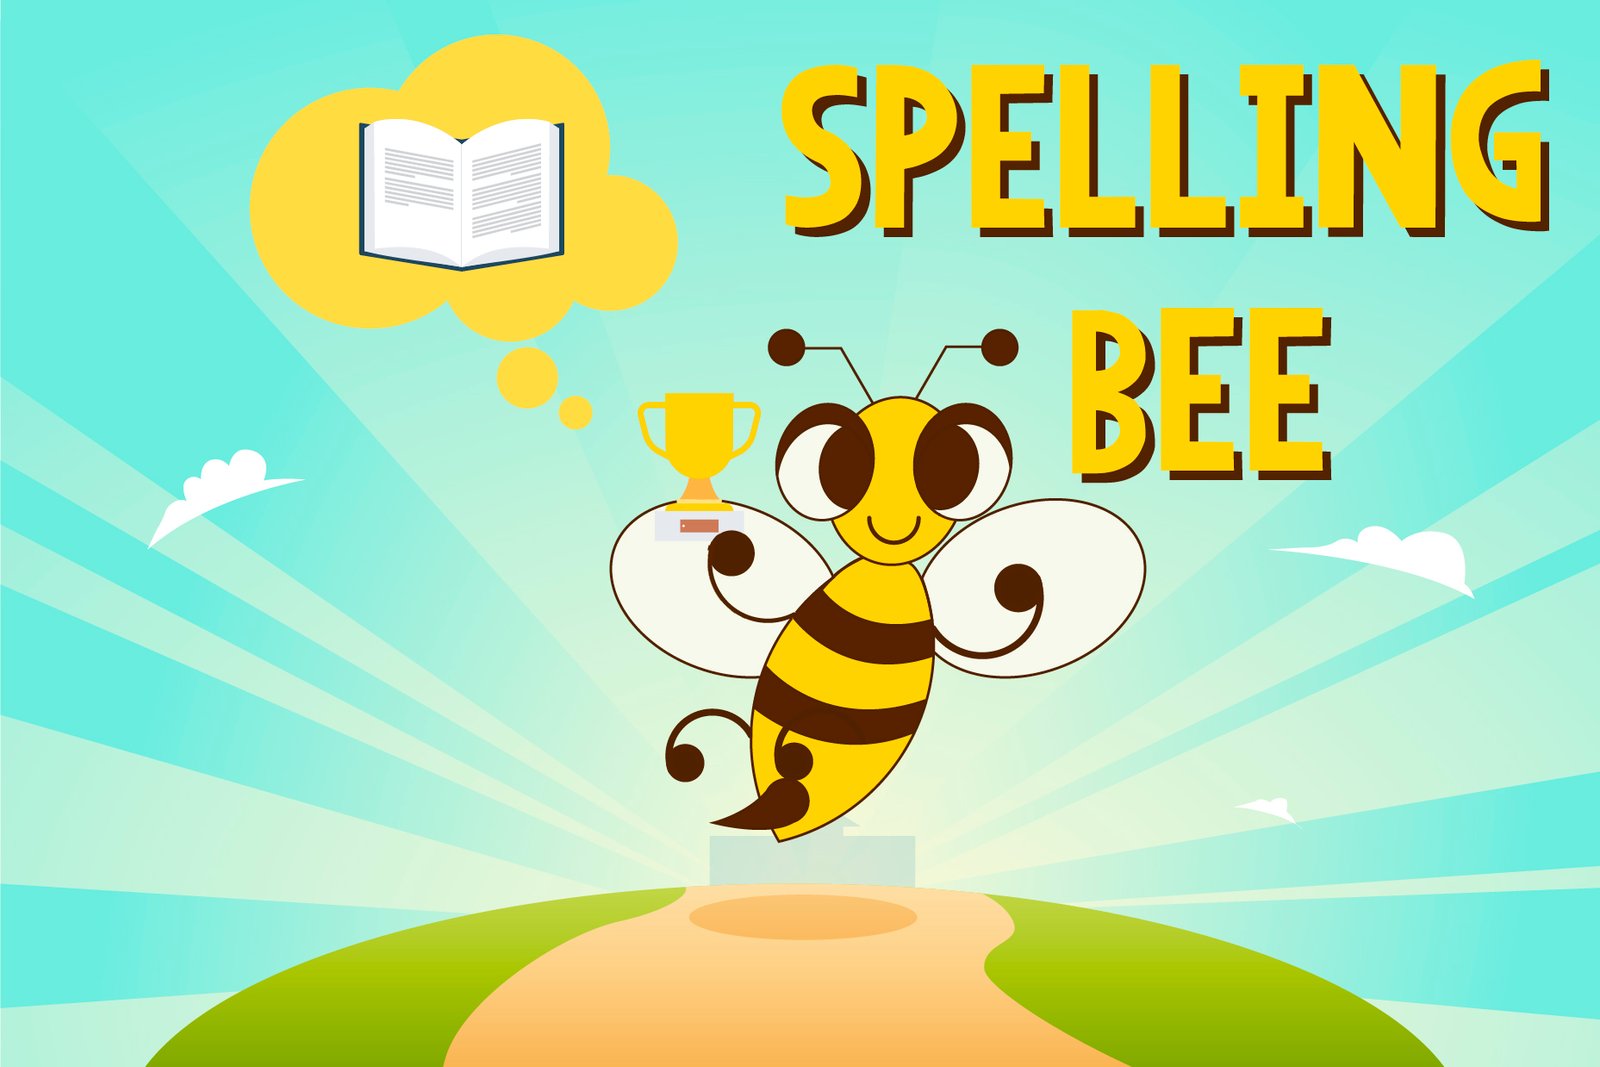 spelling bee answers